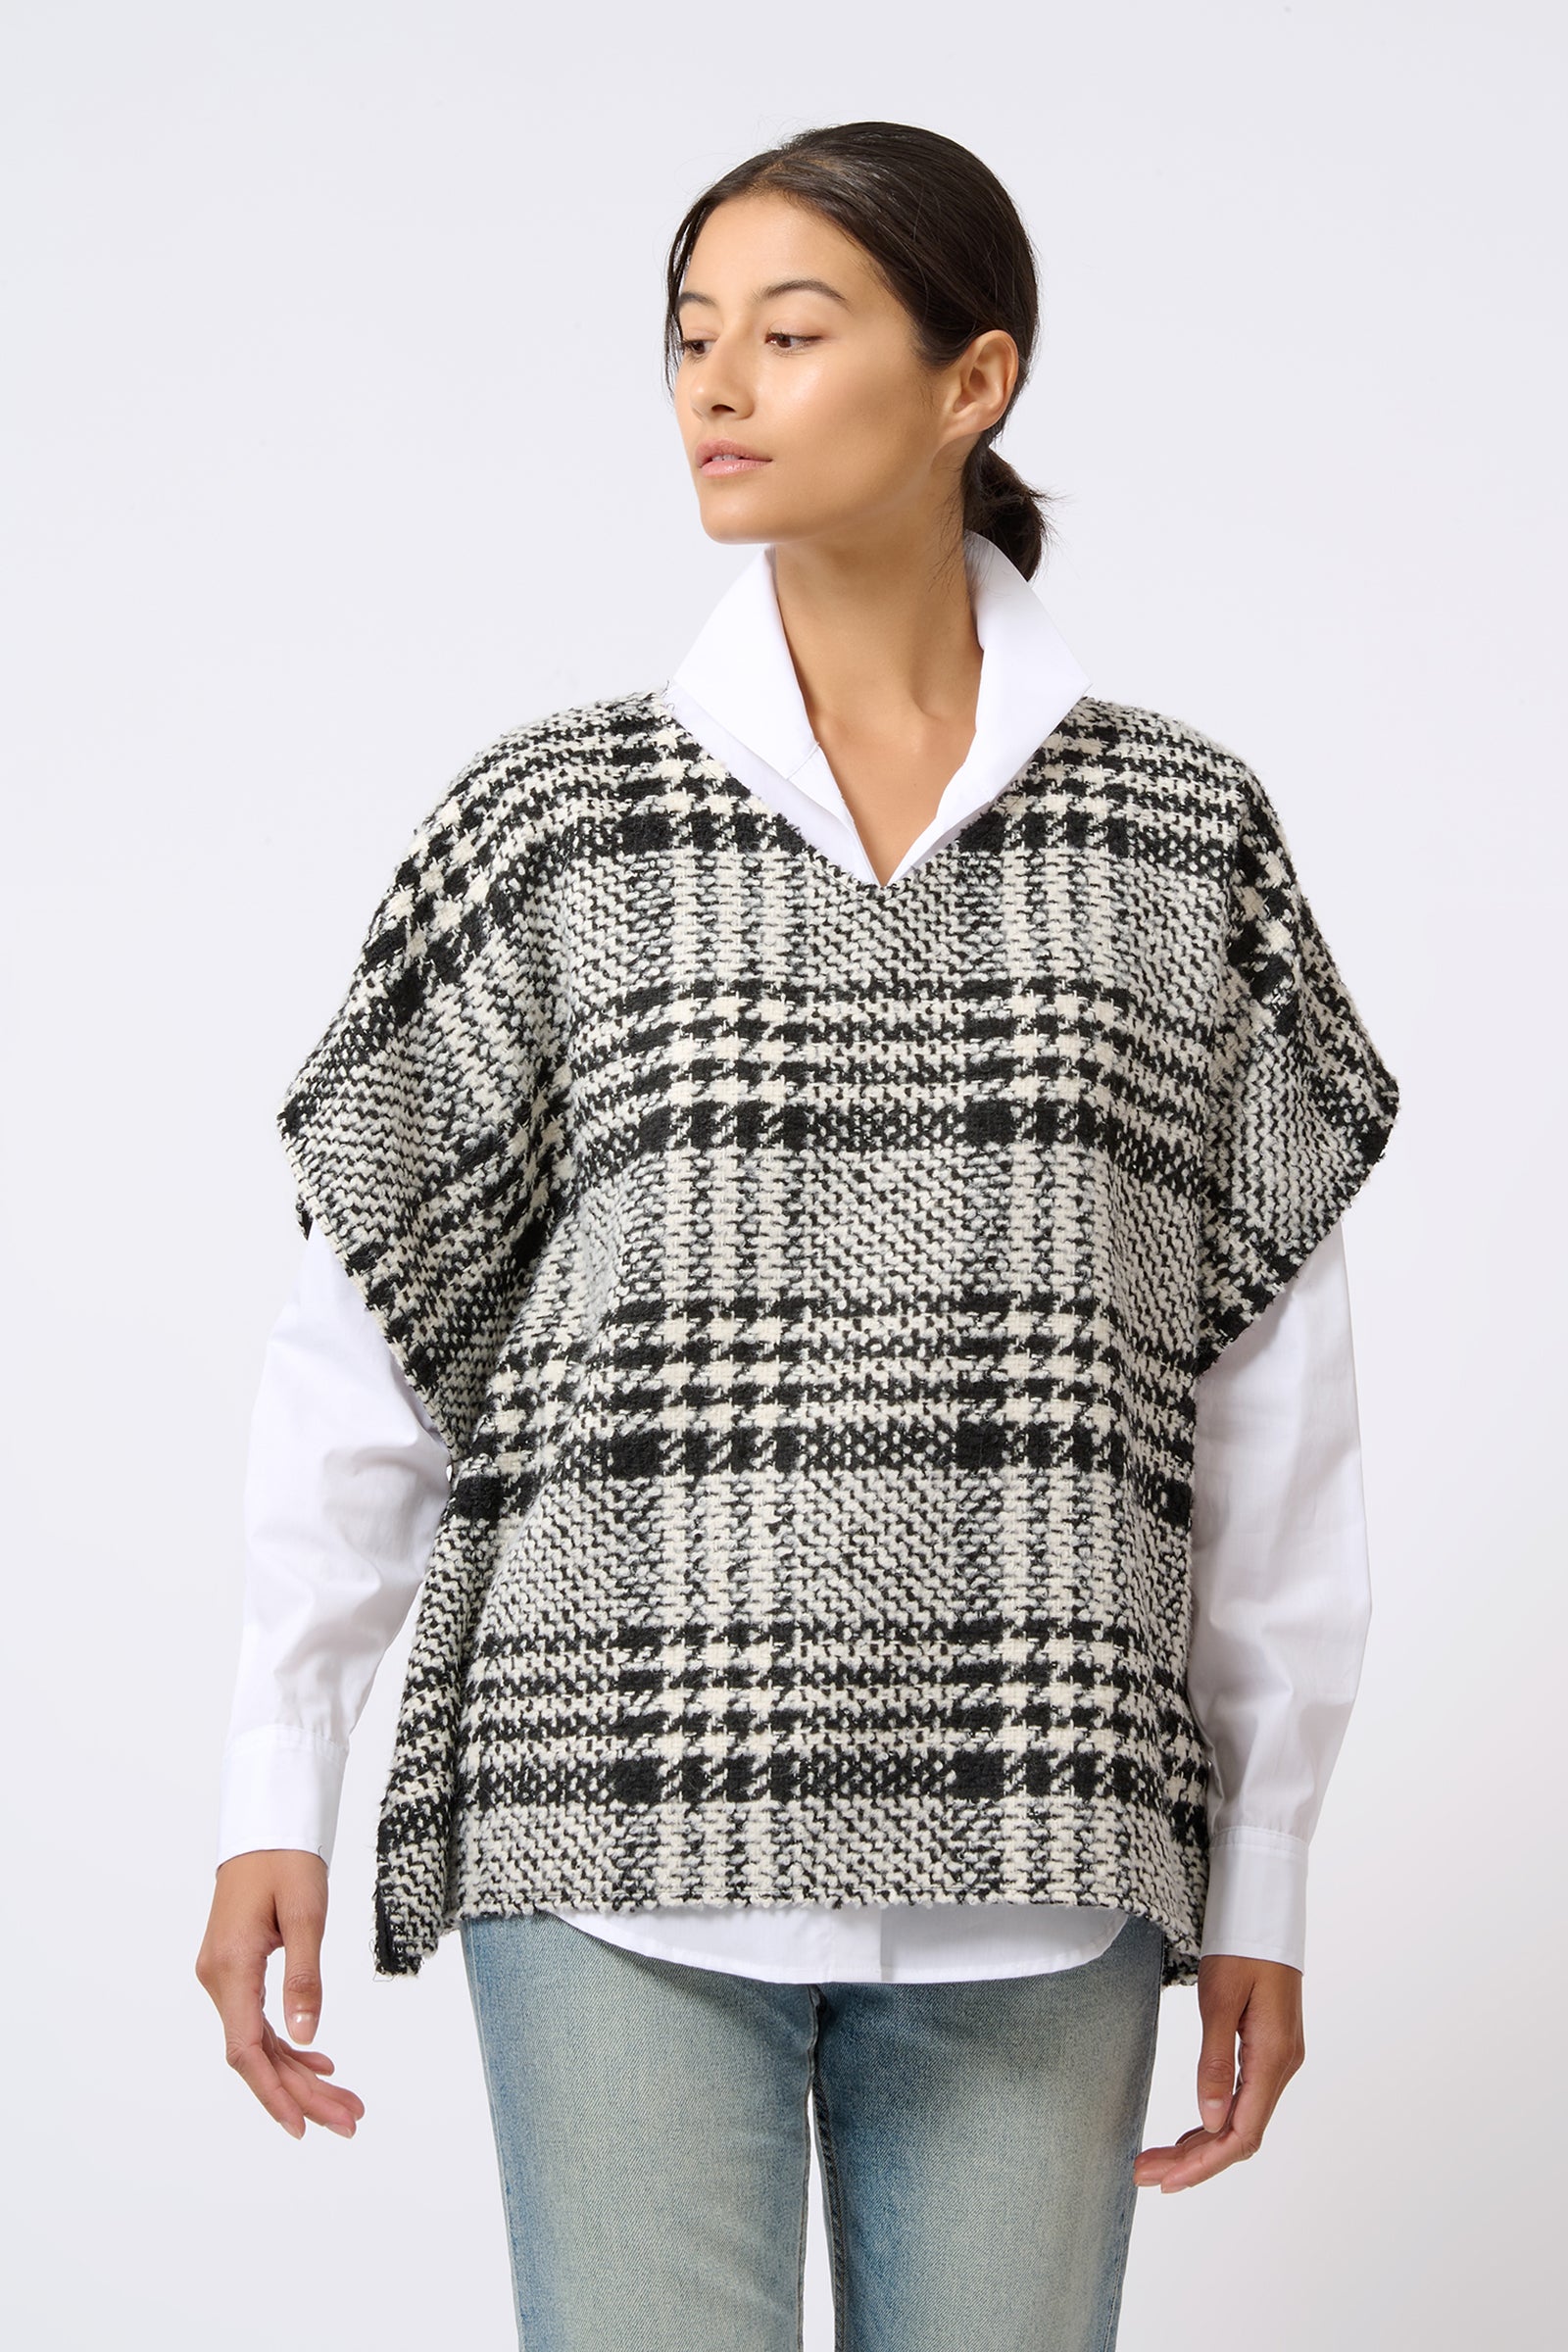 Kal Rieman Plaid Poncho in Black and White Plaid on Model Looking Right Front View